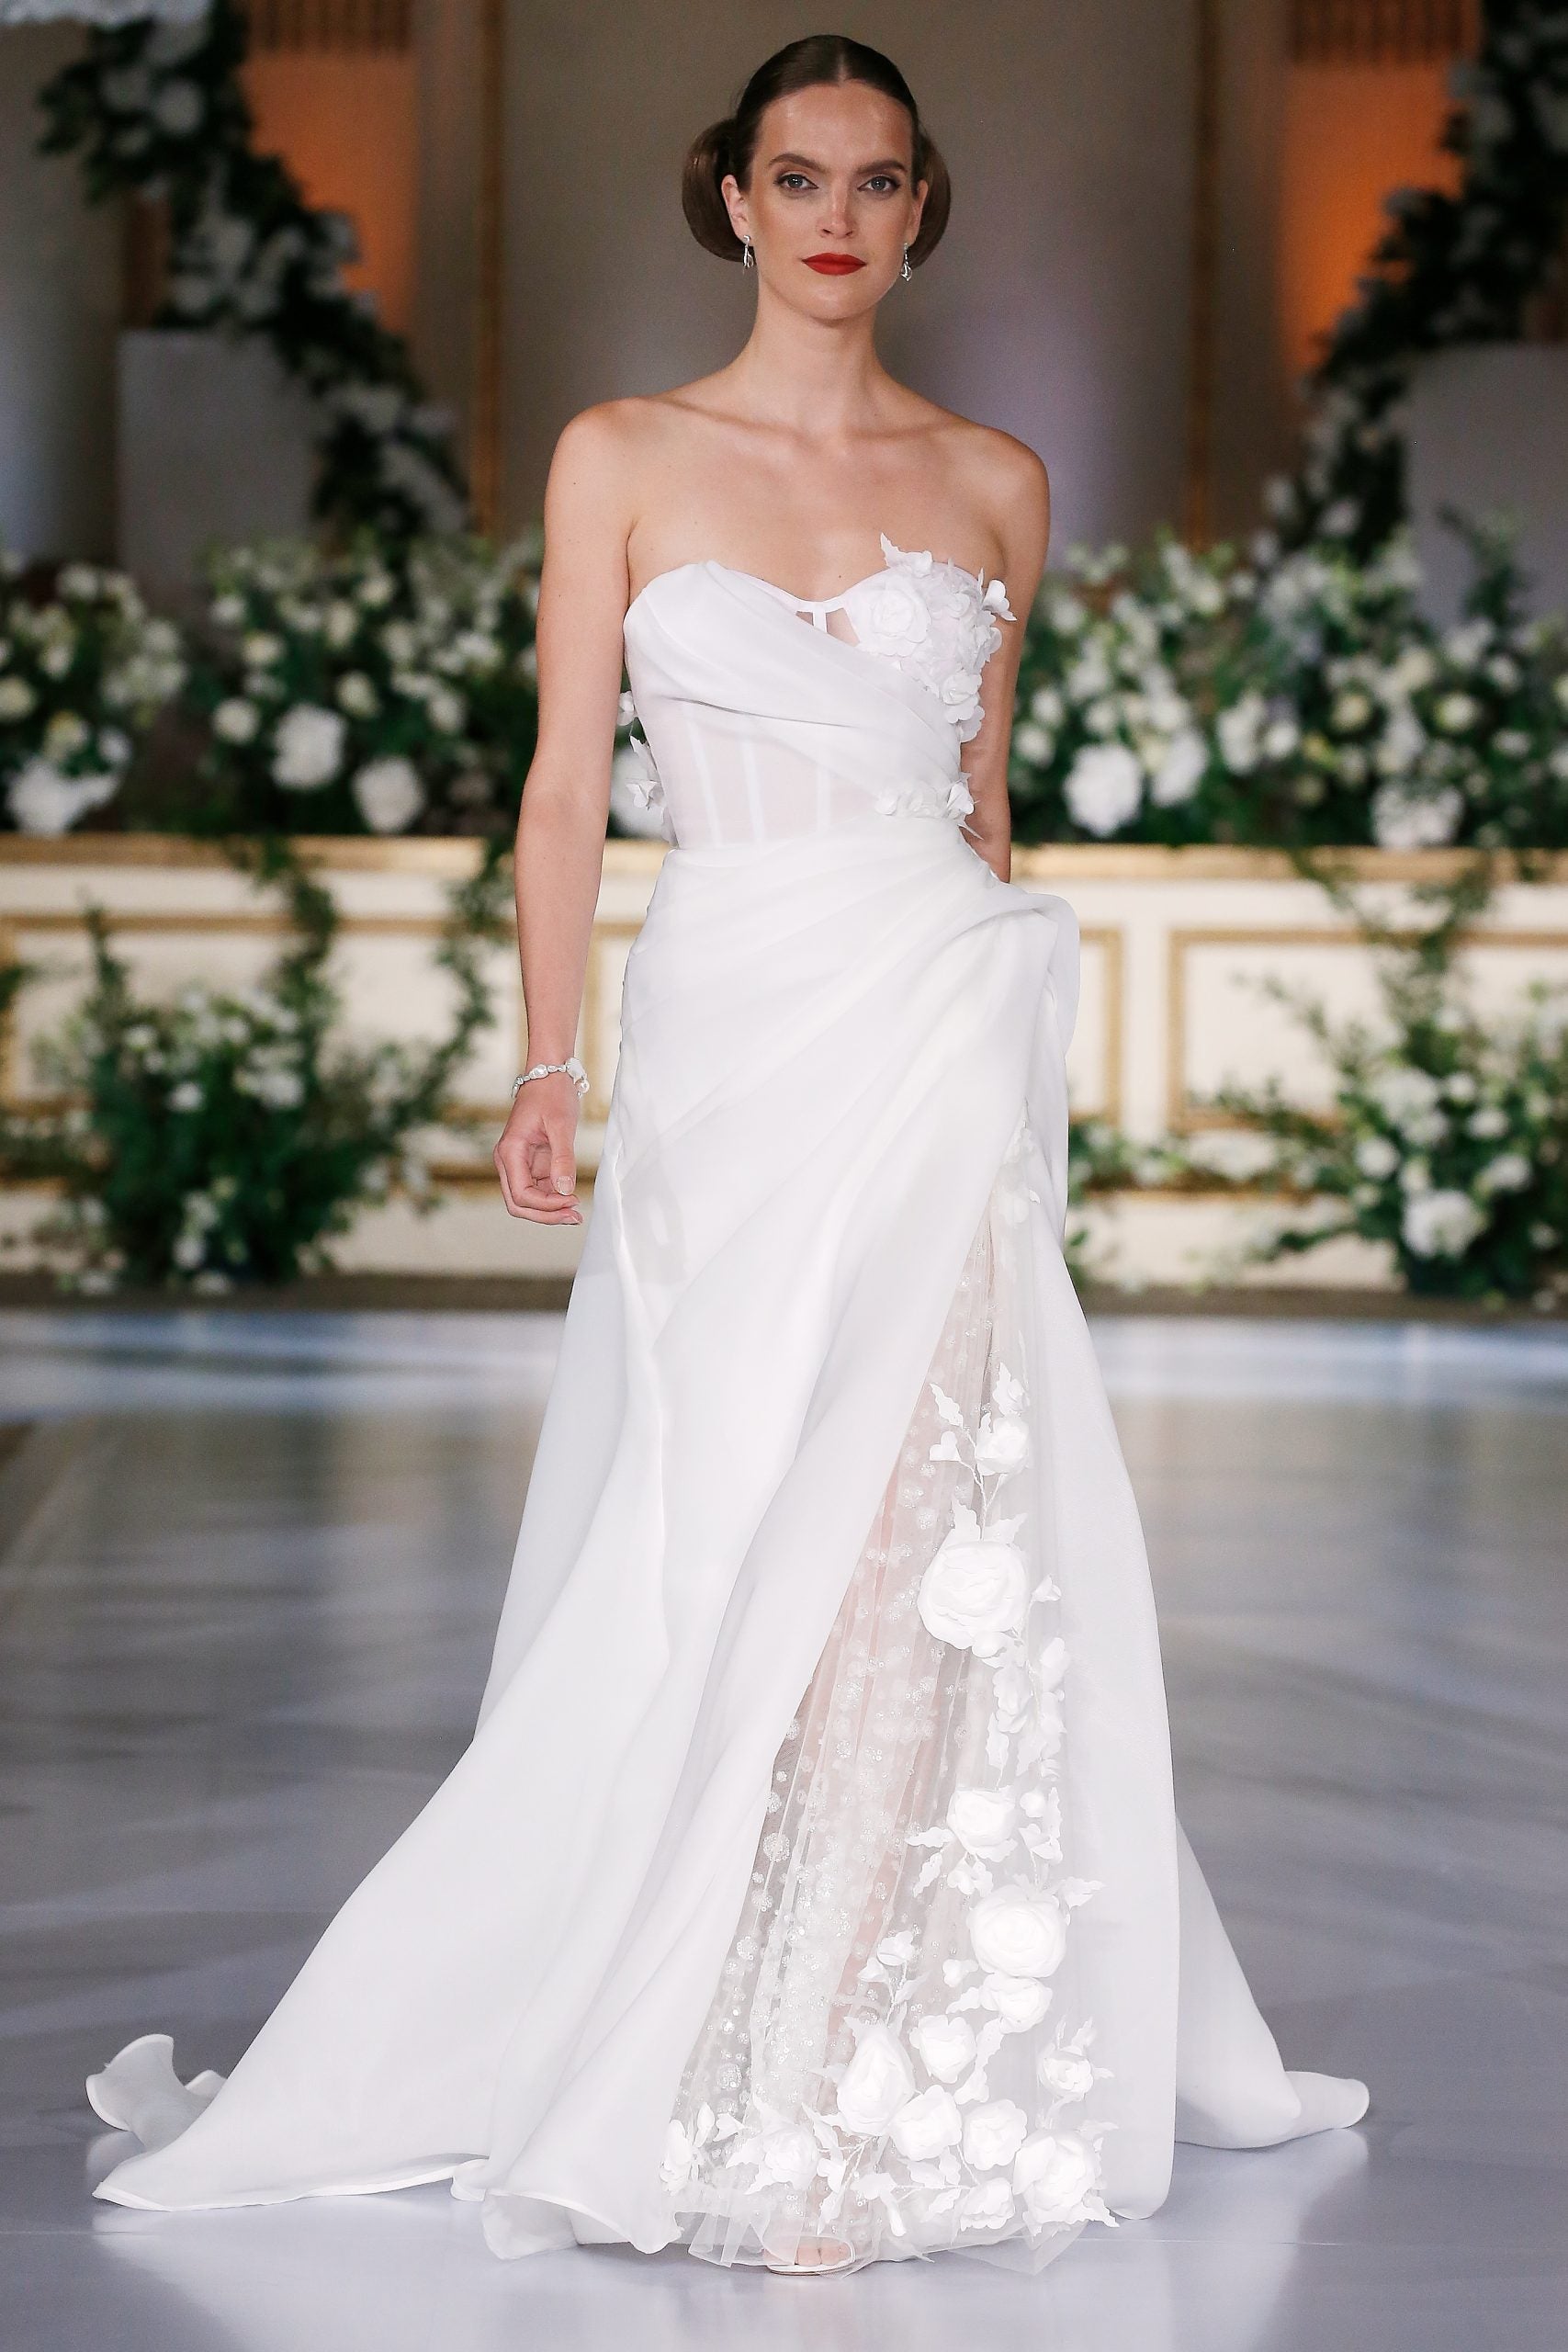 Romantic Organdy And Floral A-line Gown by Nardos - Image 1